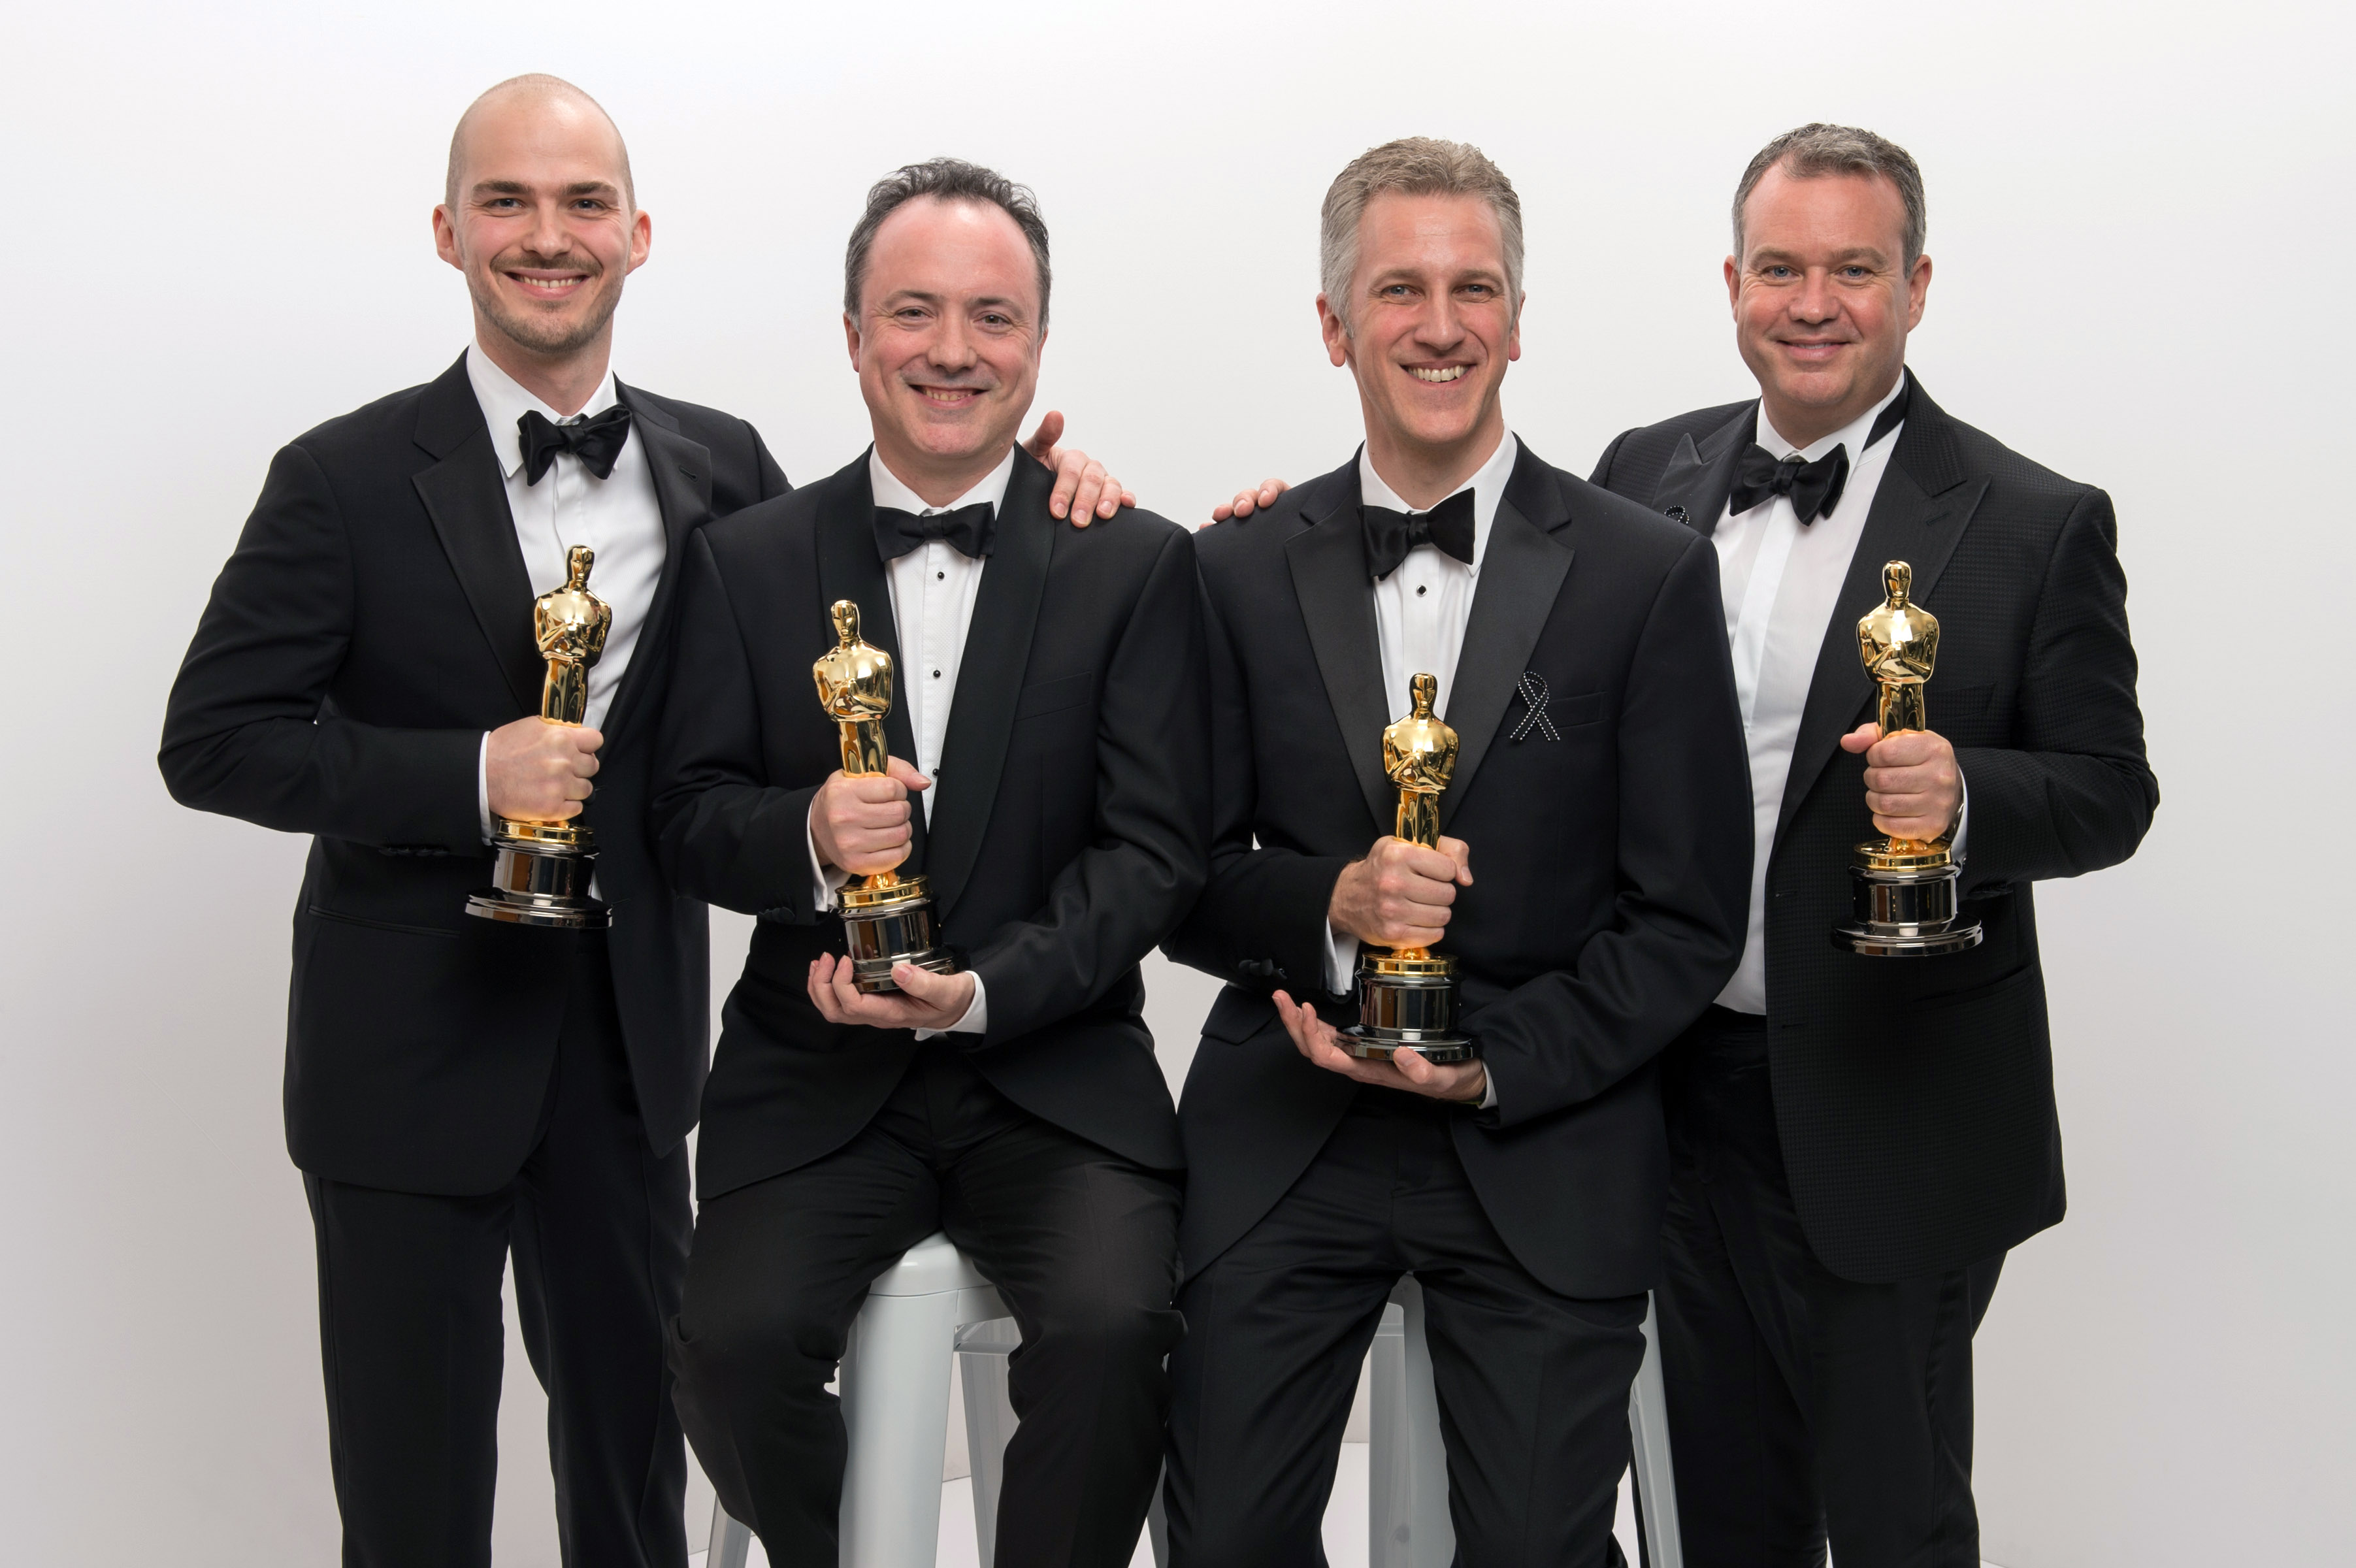 Chris Lawrence, Tim Webber, David Shirk and Neil Corbould win Oscar for GRAVITY